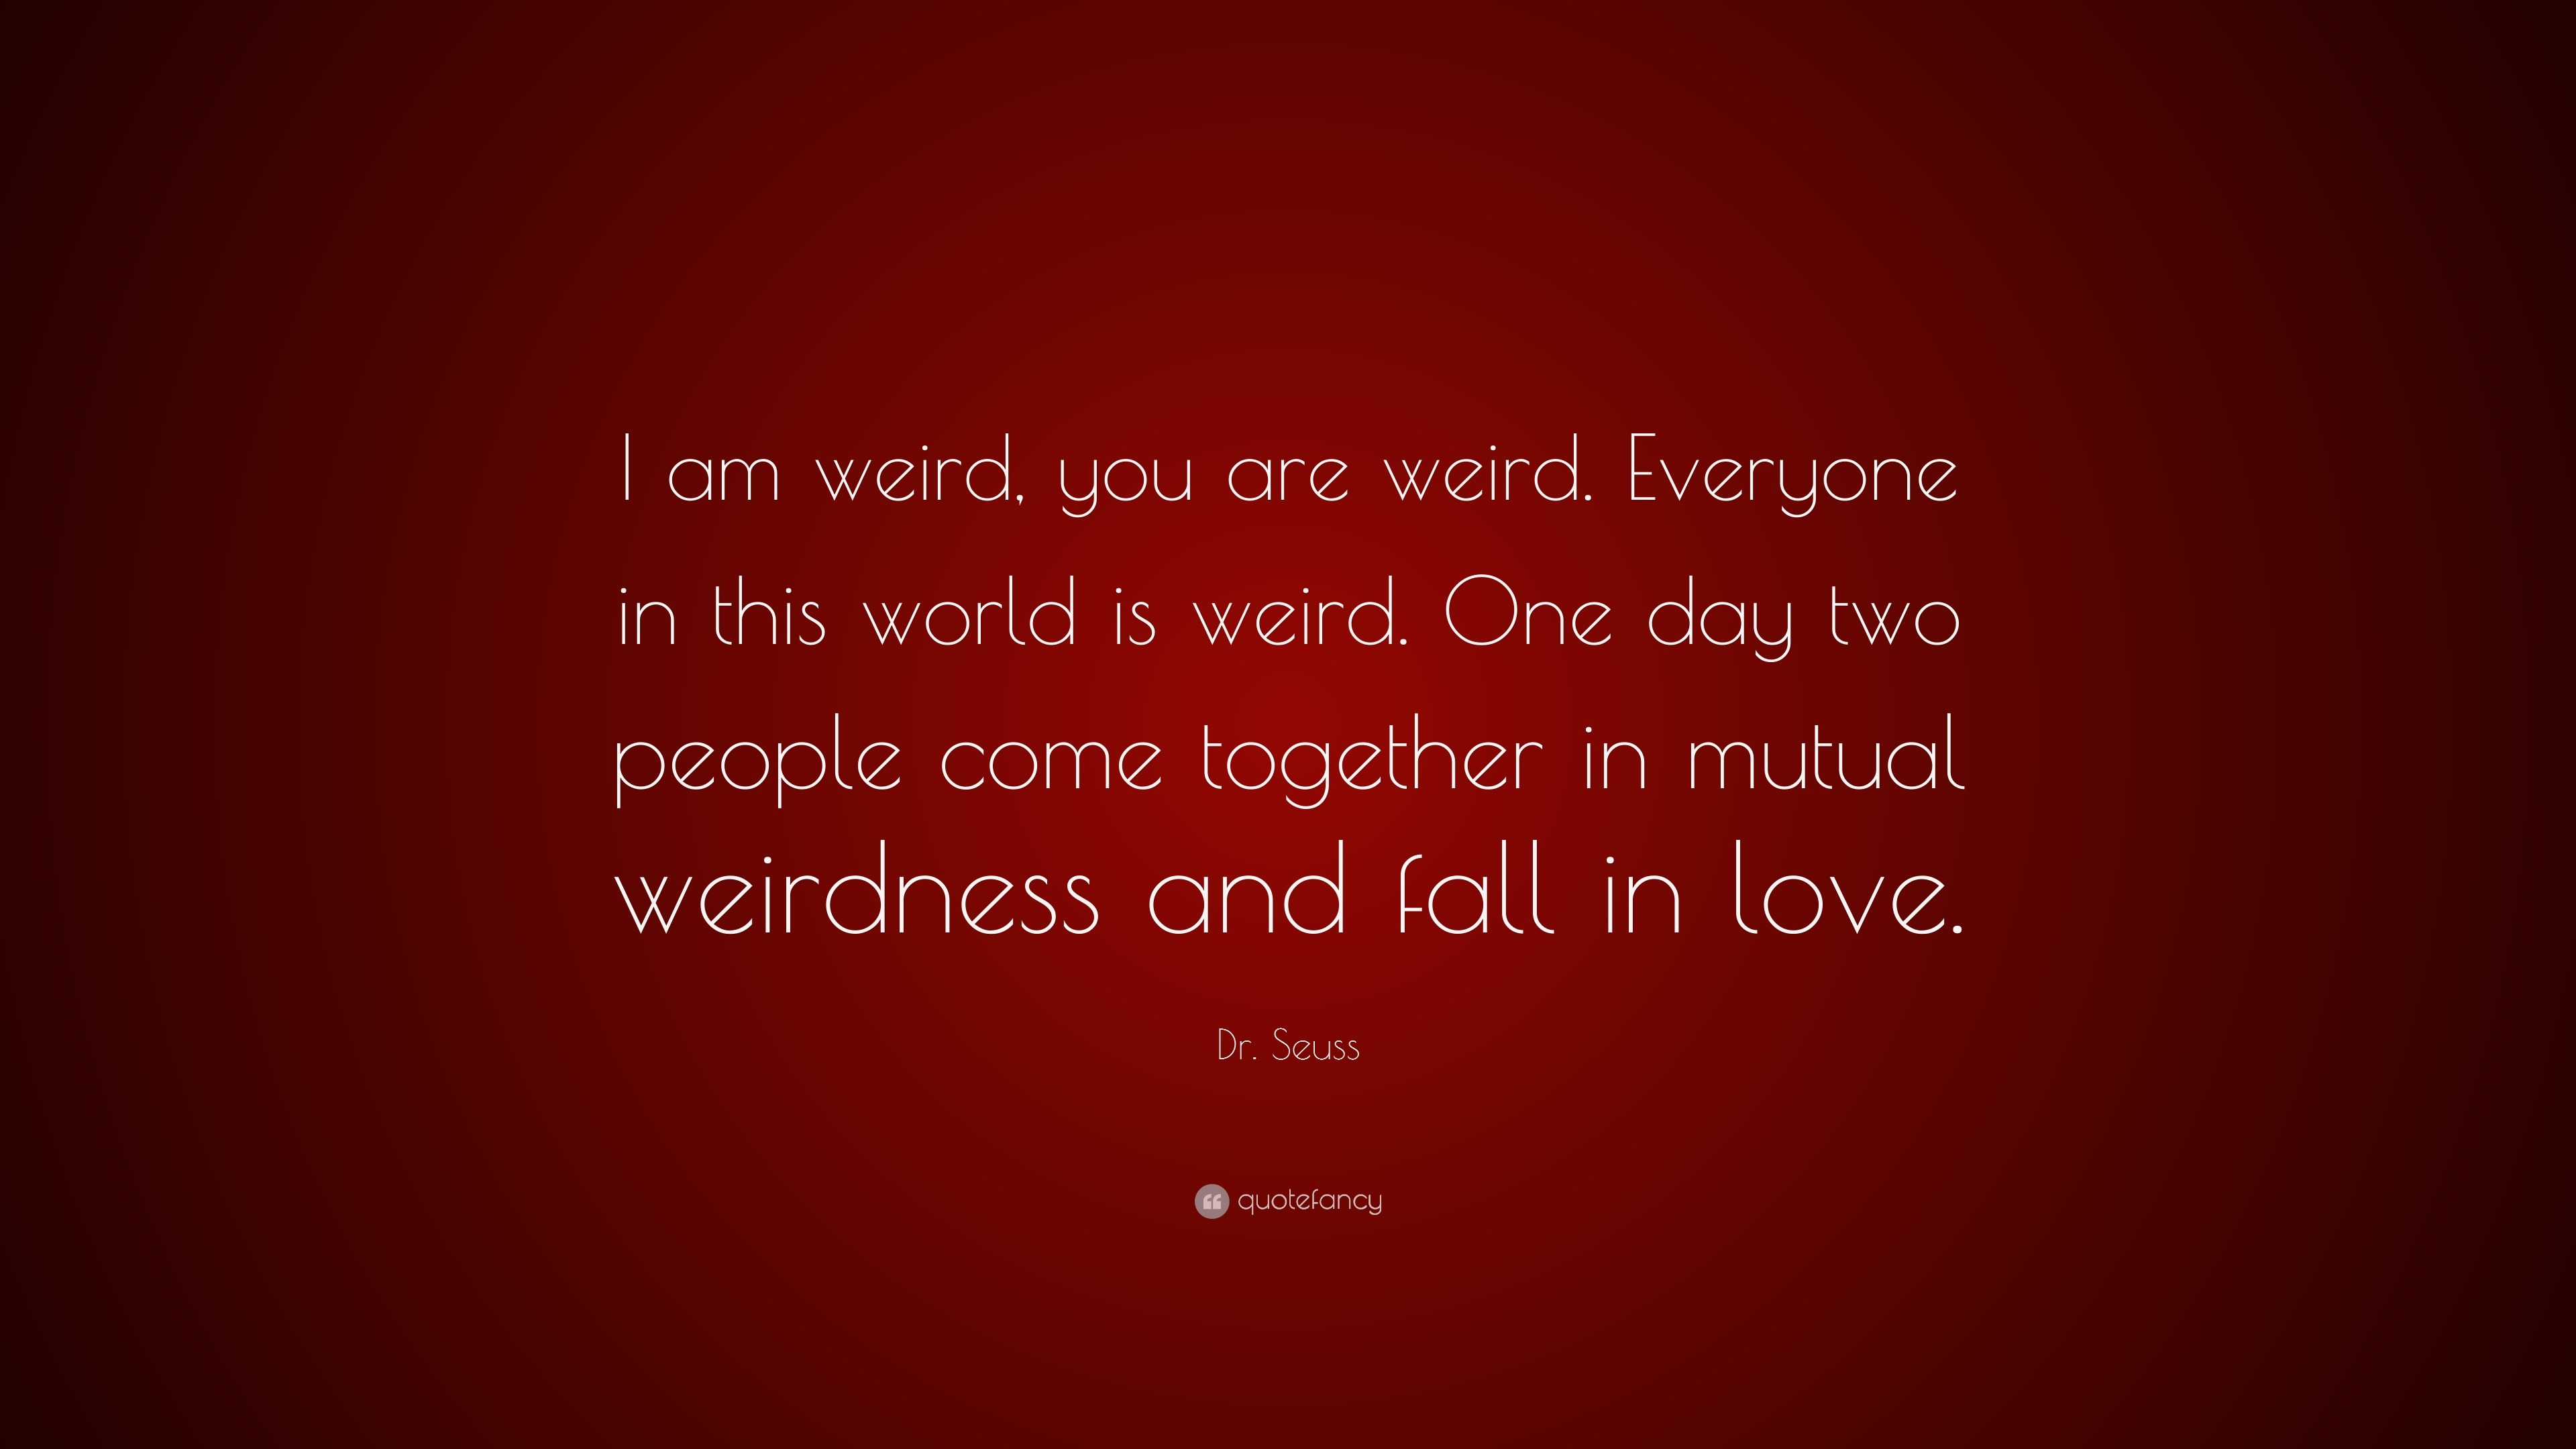 Dr. Seuss Quote “I am weird, you are weird. Everyone in